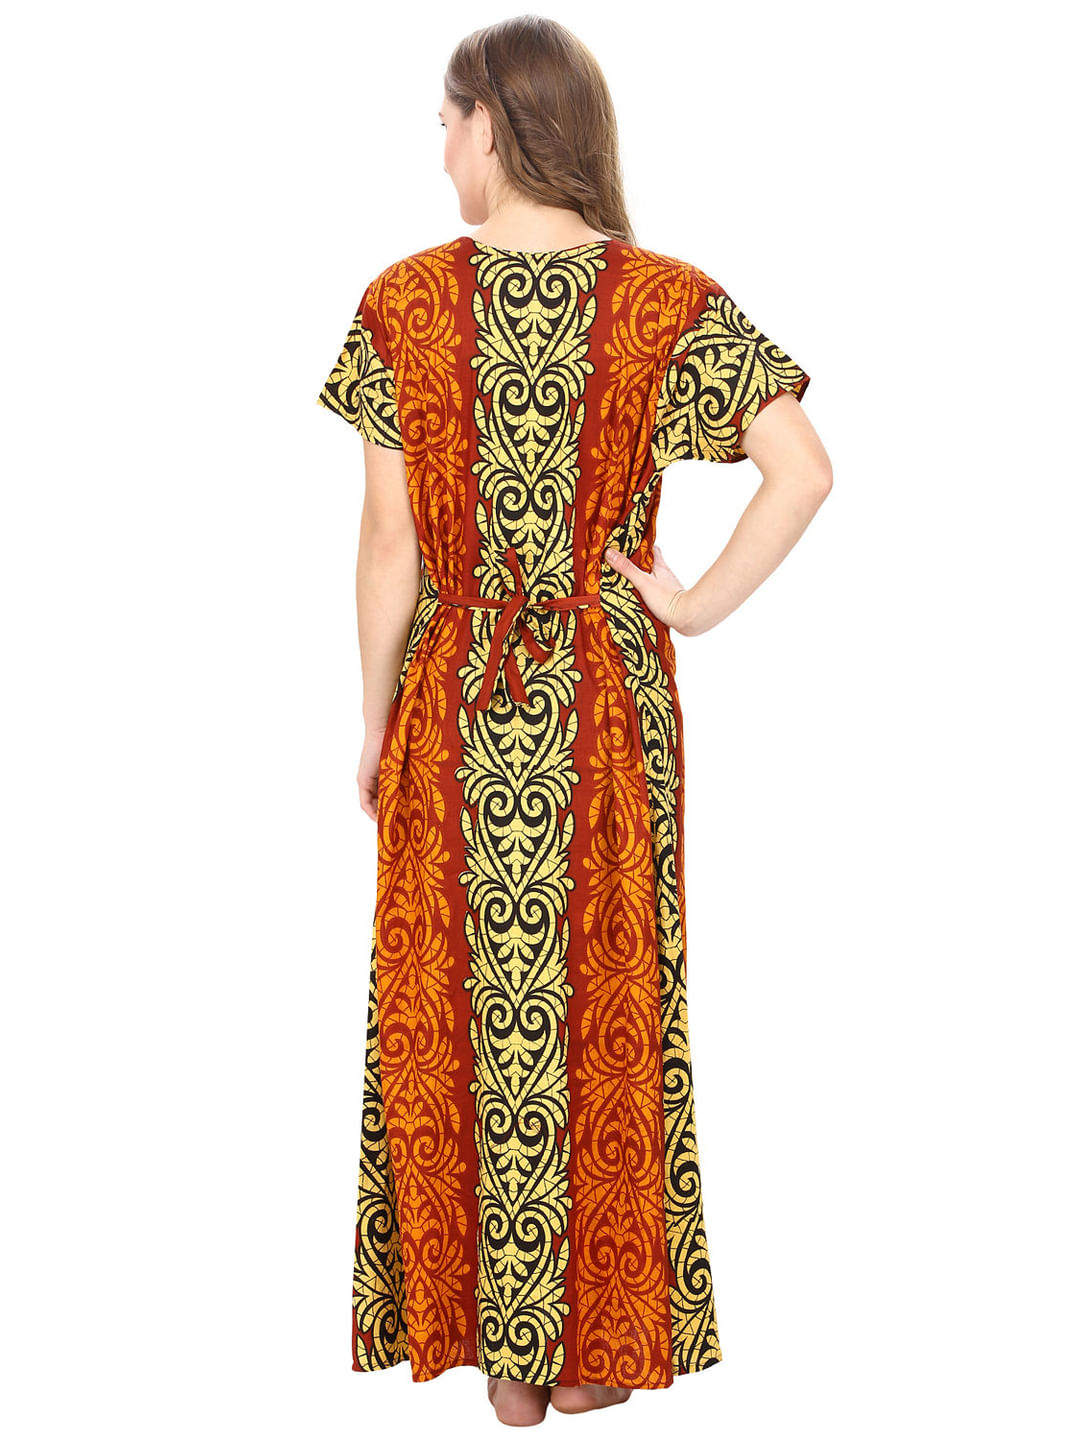 Cotton Yellow & Rust Brown Printed Maternity Nighty (Free Size)